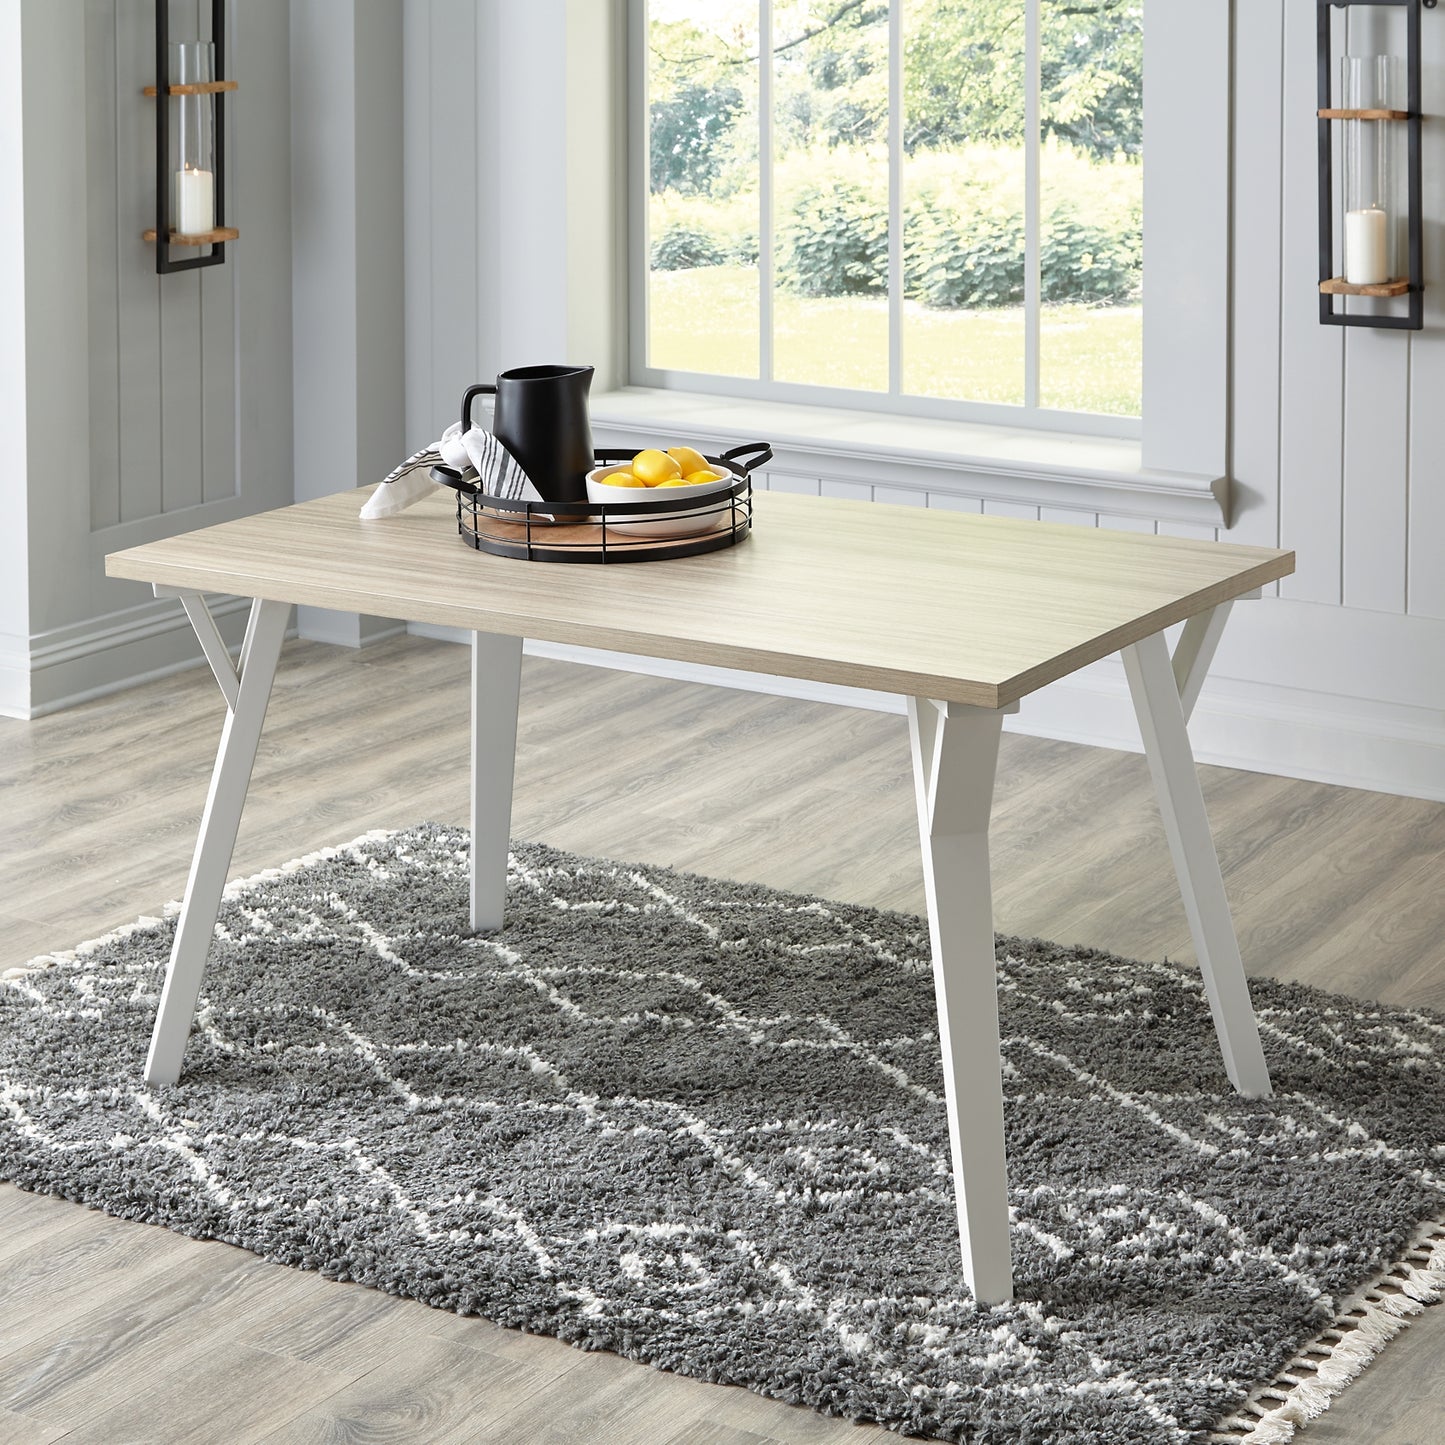 Grannen Rectangular Dining Room Table Signature Design by Ashley®